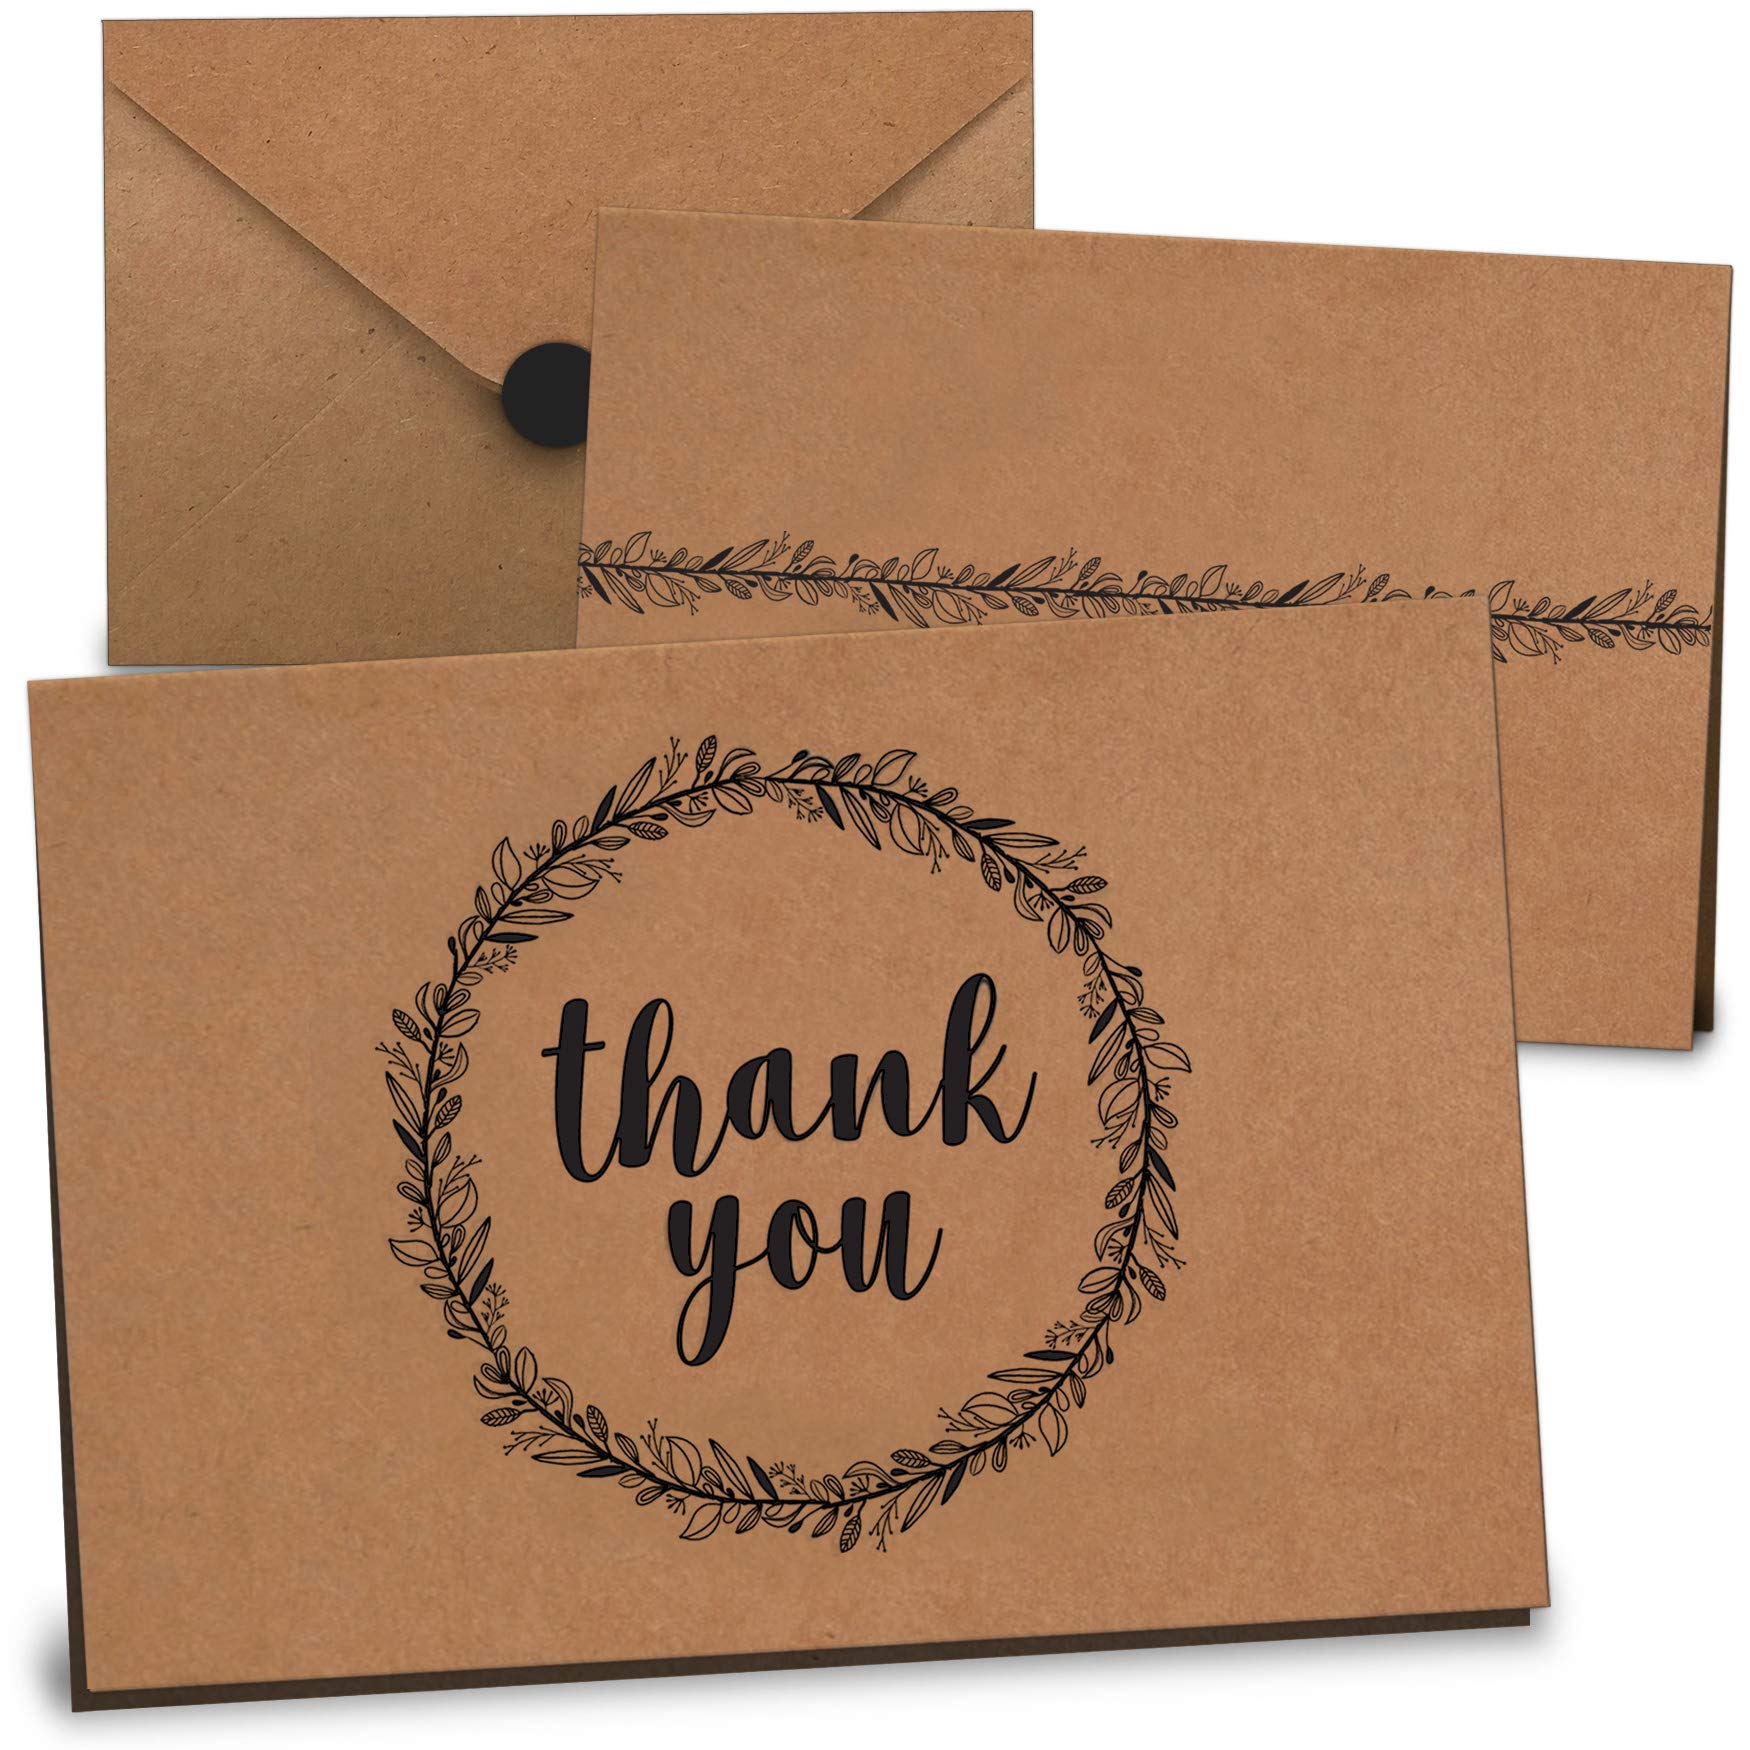 Thank You Cards Bulk Set of 100 - Includes Thank You Notes, Blank Cards with Envelopes & Stickers - Perfect for Business, Wedding, Graduation, Bridal & Baby Shower, Funeral - Floral Kraft Paper Design